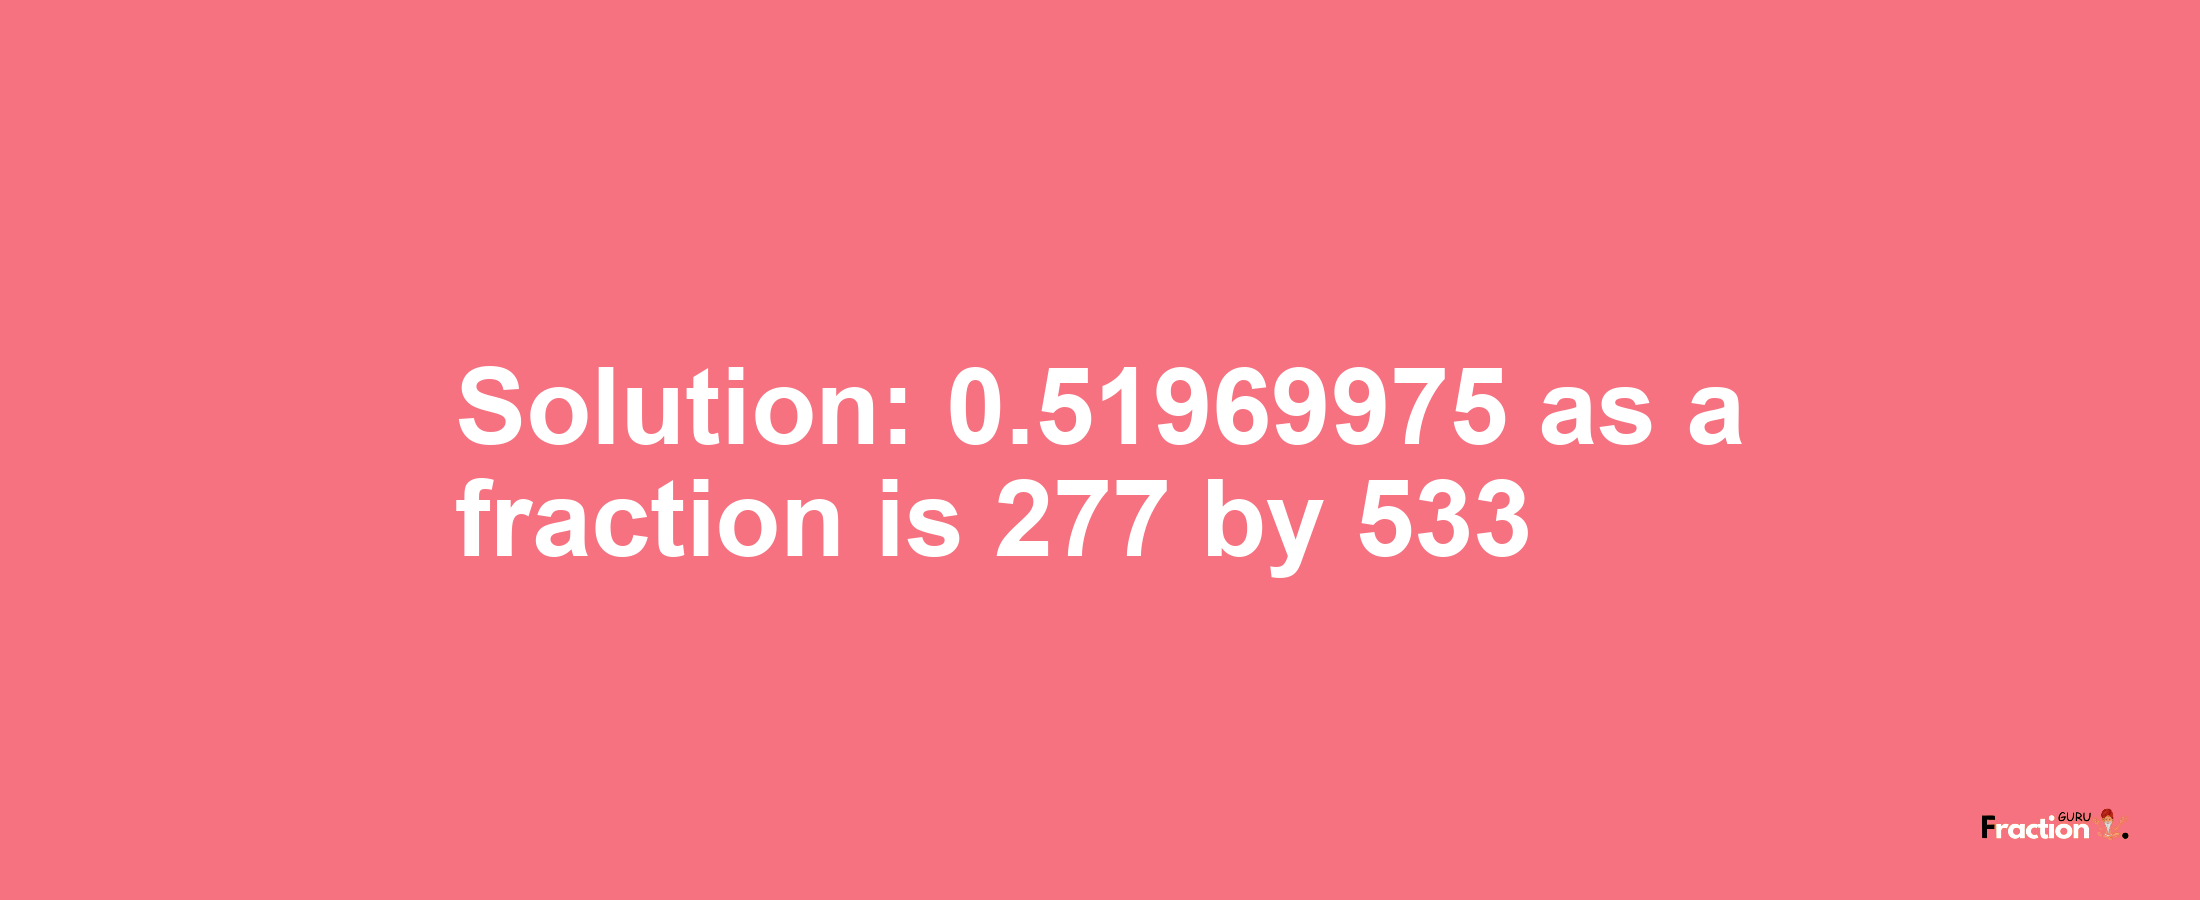 Solution:0.51969975 as a fraction is 277/533